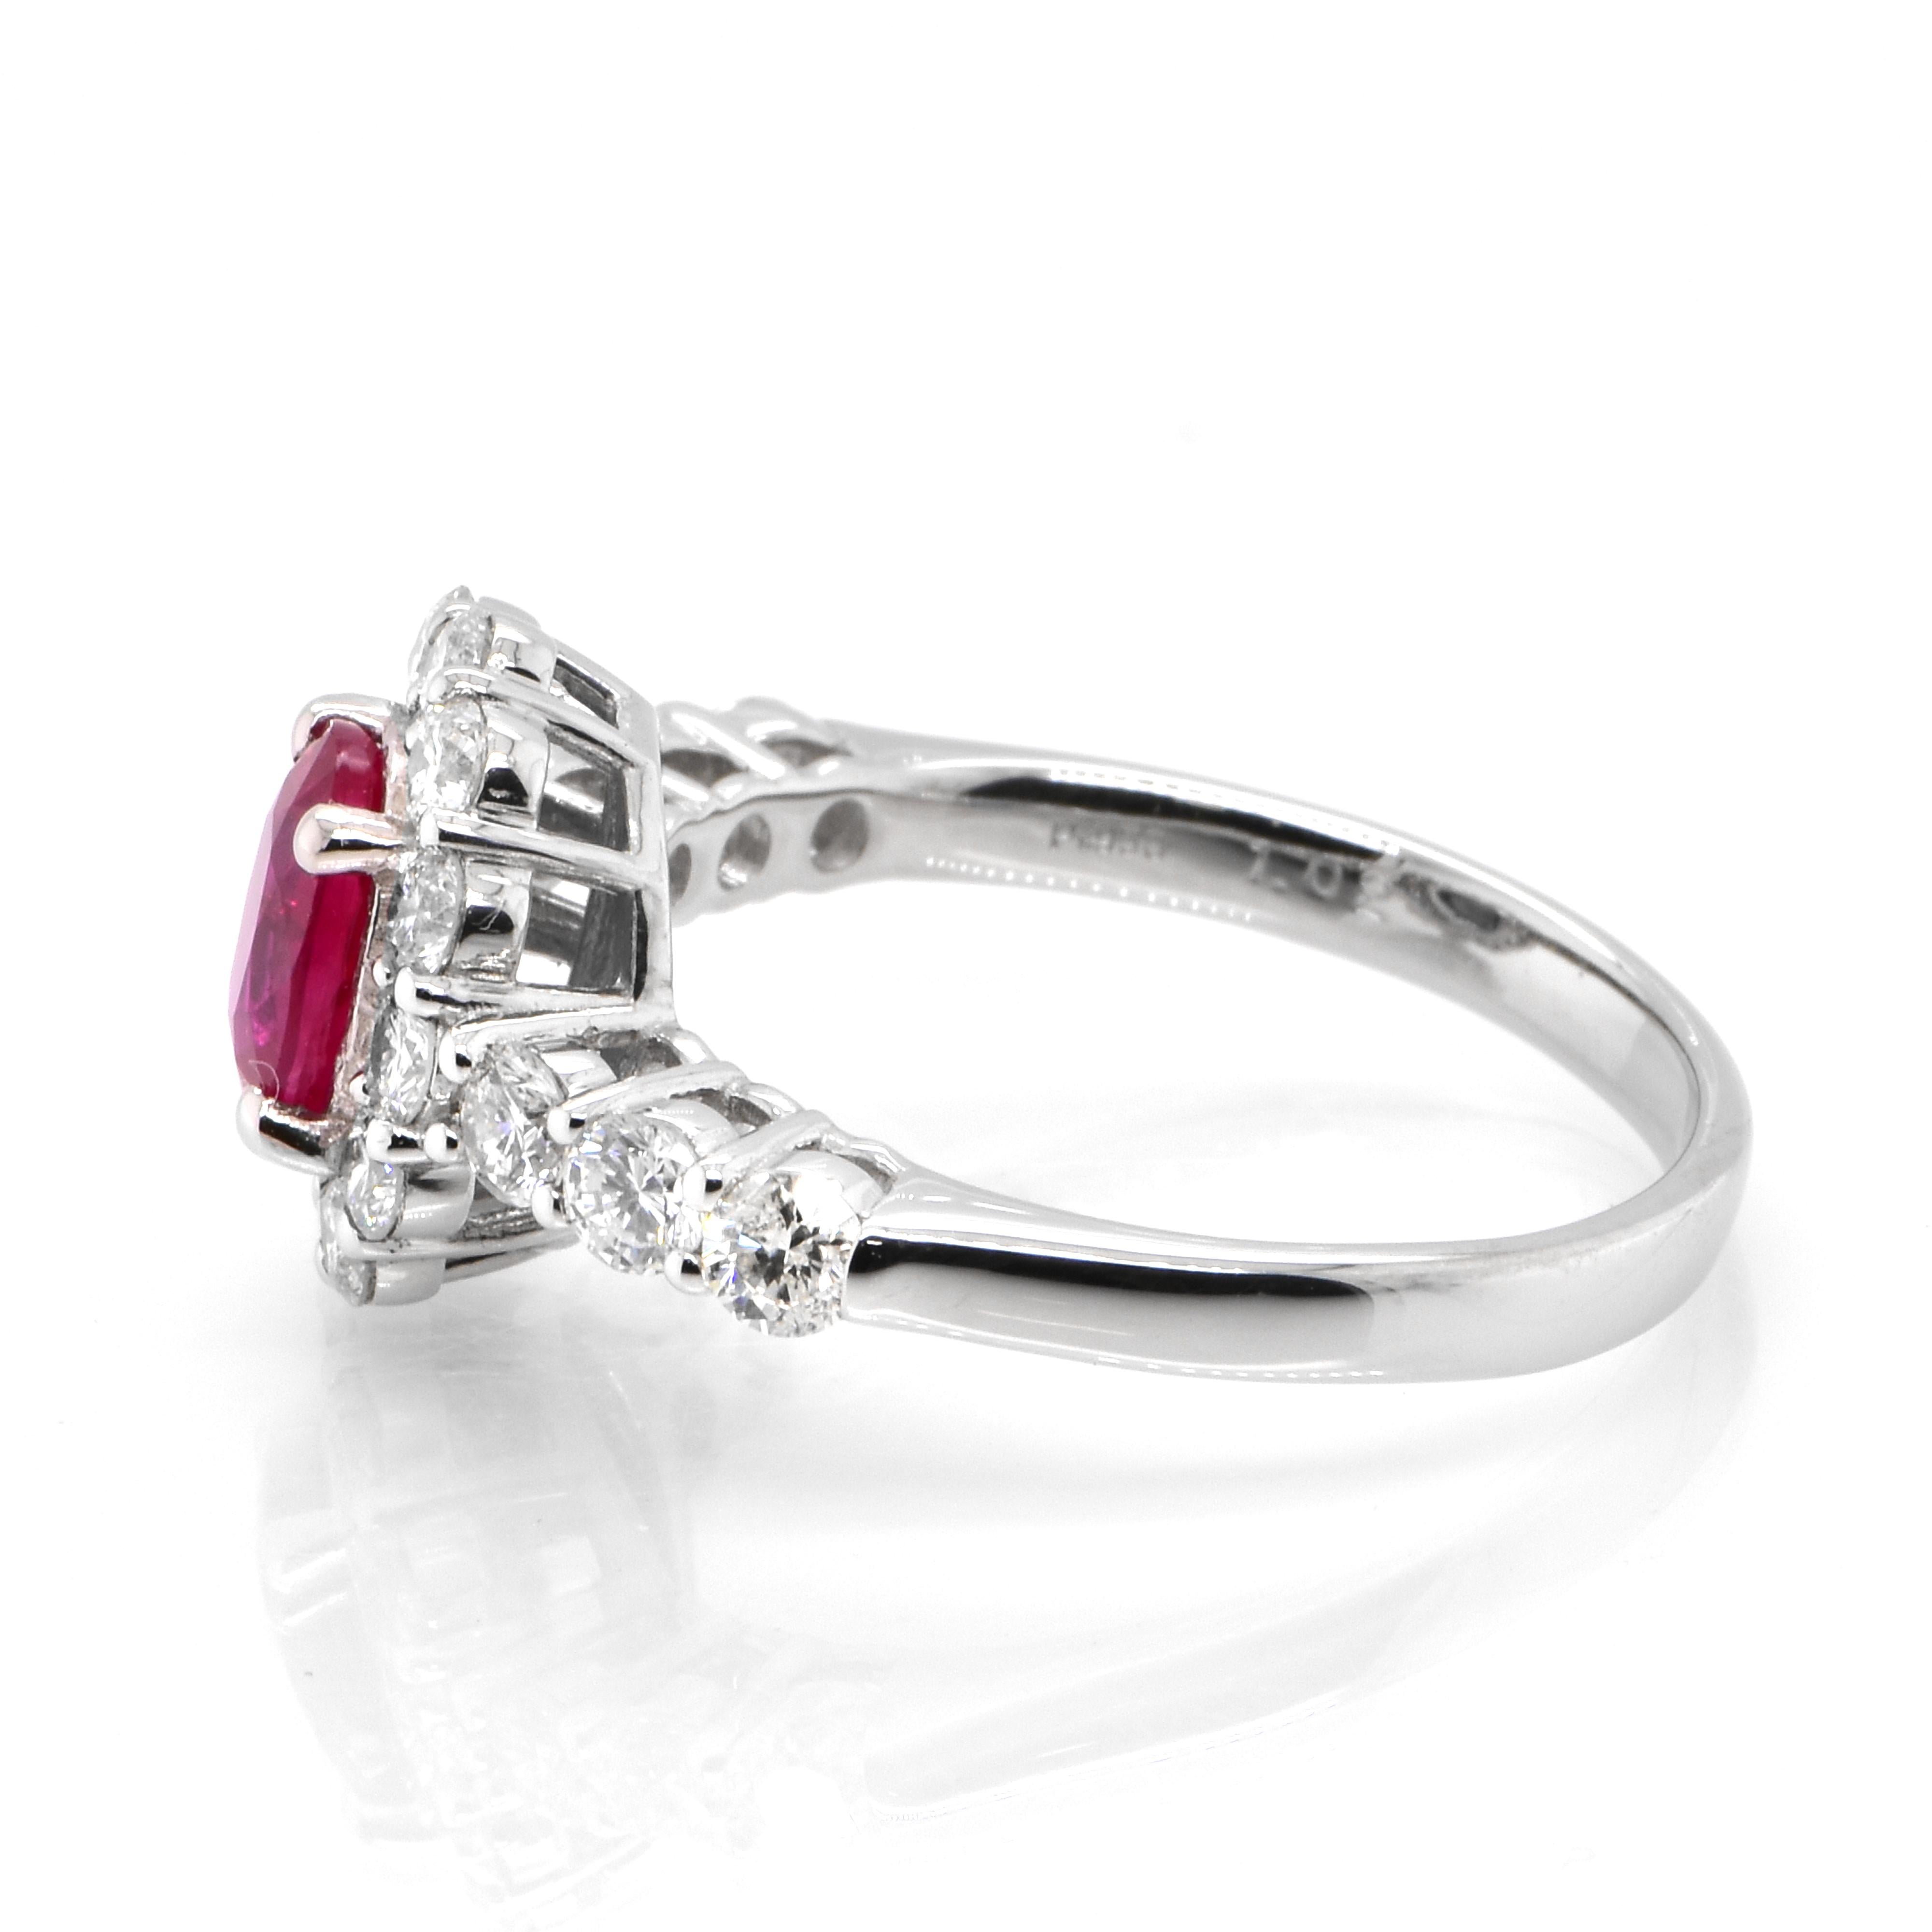 Oval Cut GIA Certified 1.02 Carat Burmese Origin Ruby and Diamond Ring Made in Platinum For Sale